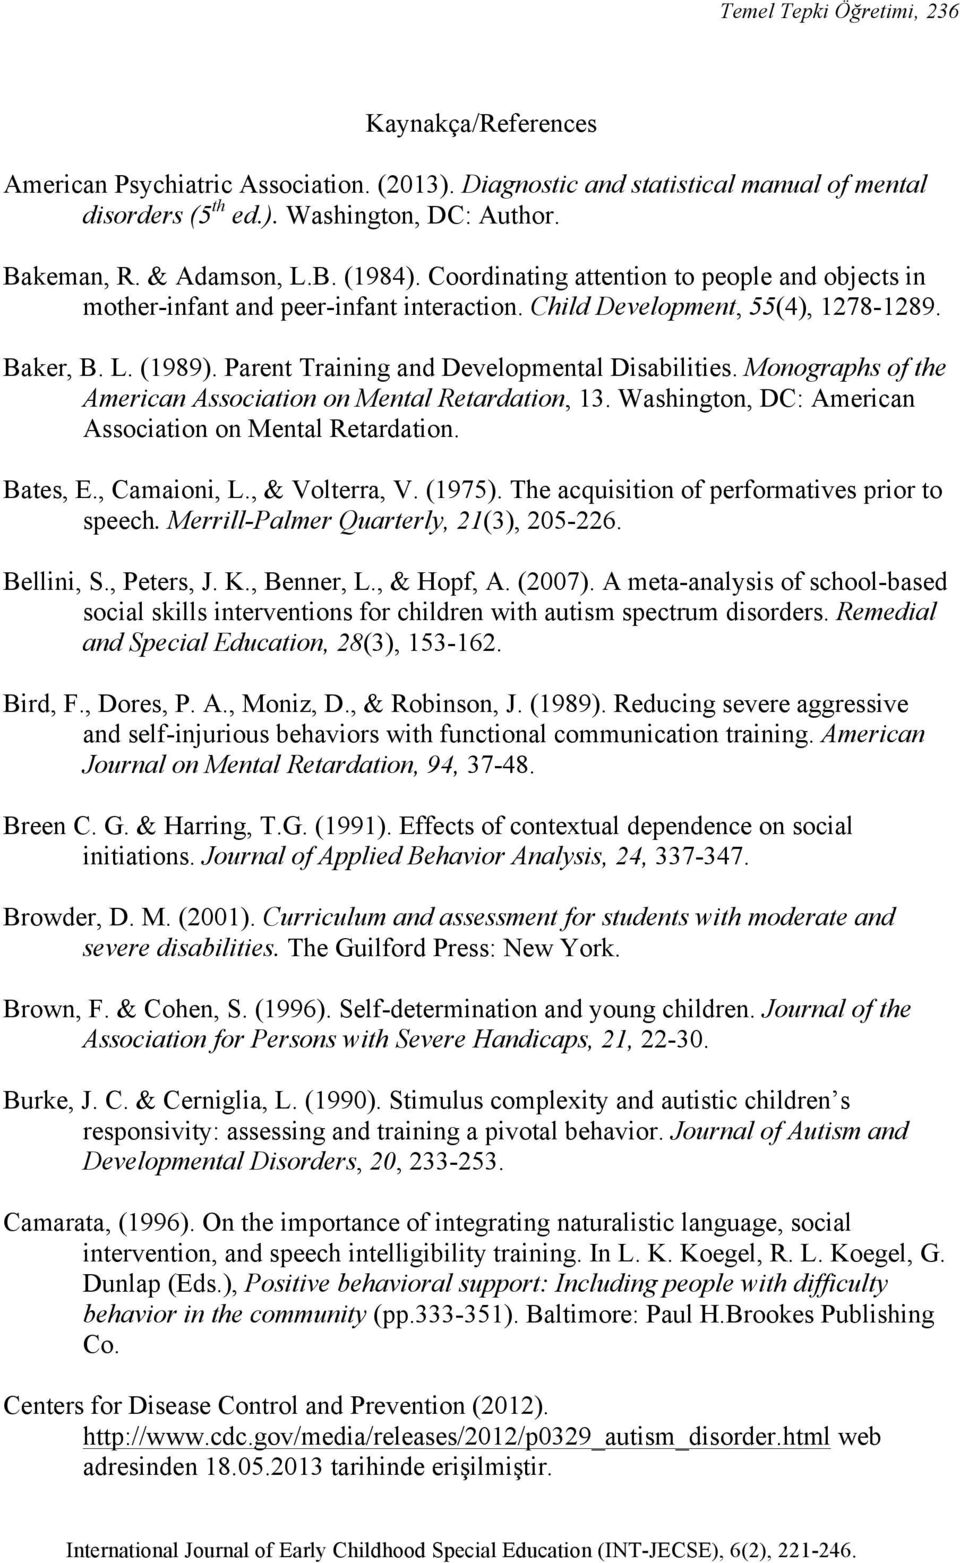 Parent Training and Developmental Disabilities. Monographs of the American Association on Mental Retardation, 13. Washington, DC: American Association on Mental Retardation. Bates, E., Camaioni, L.